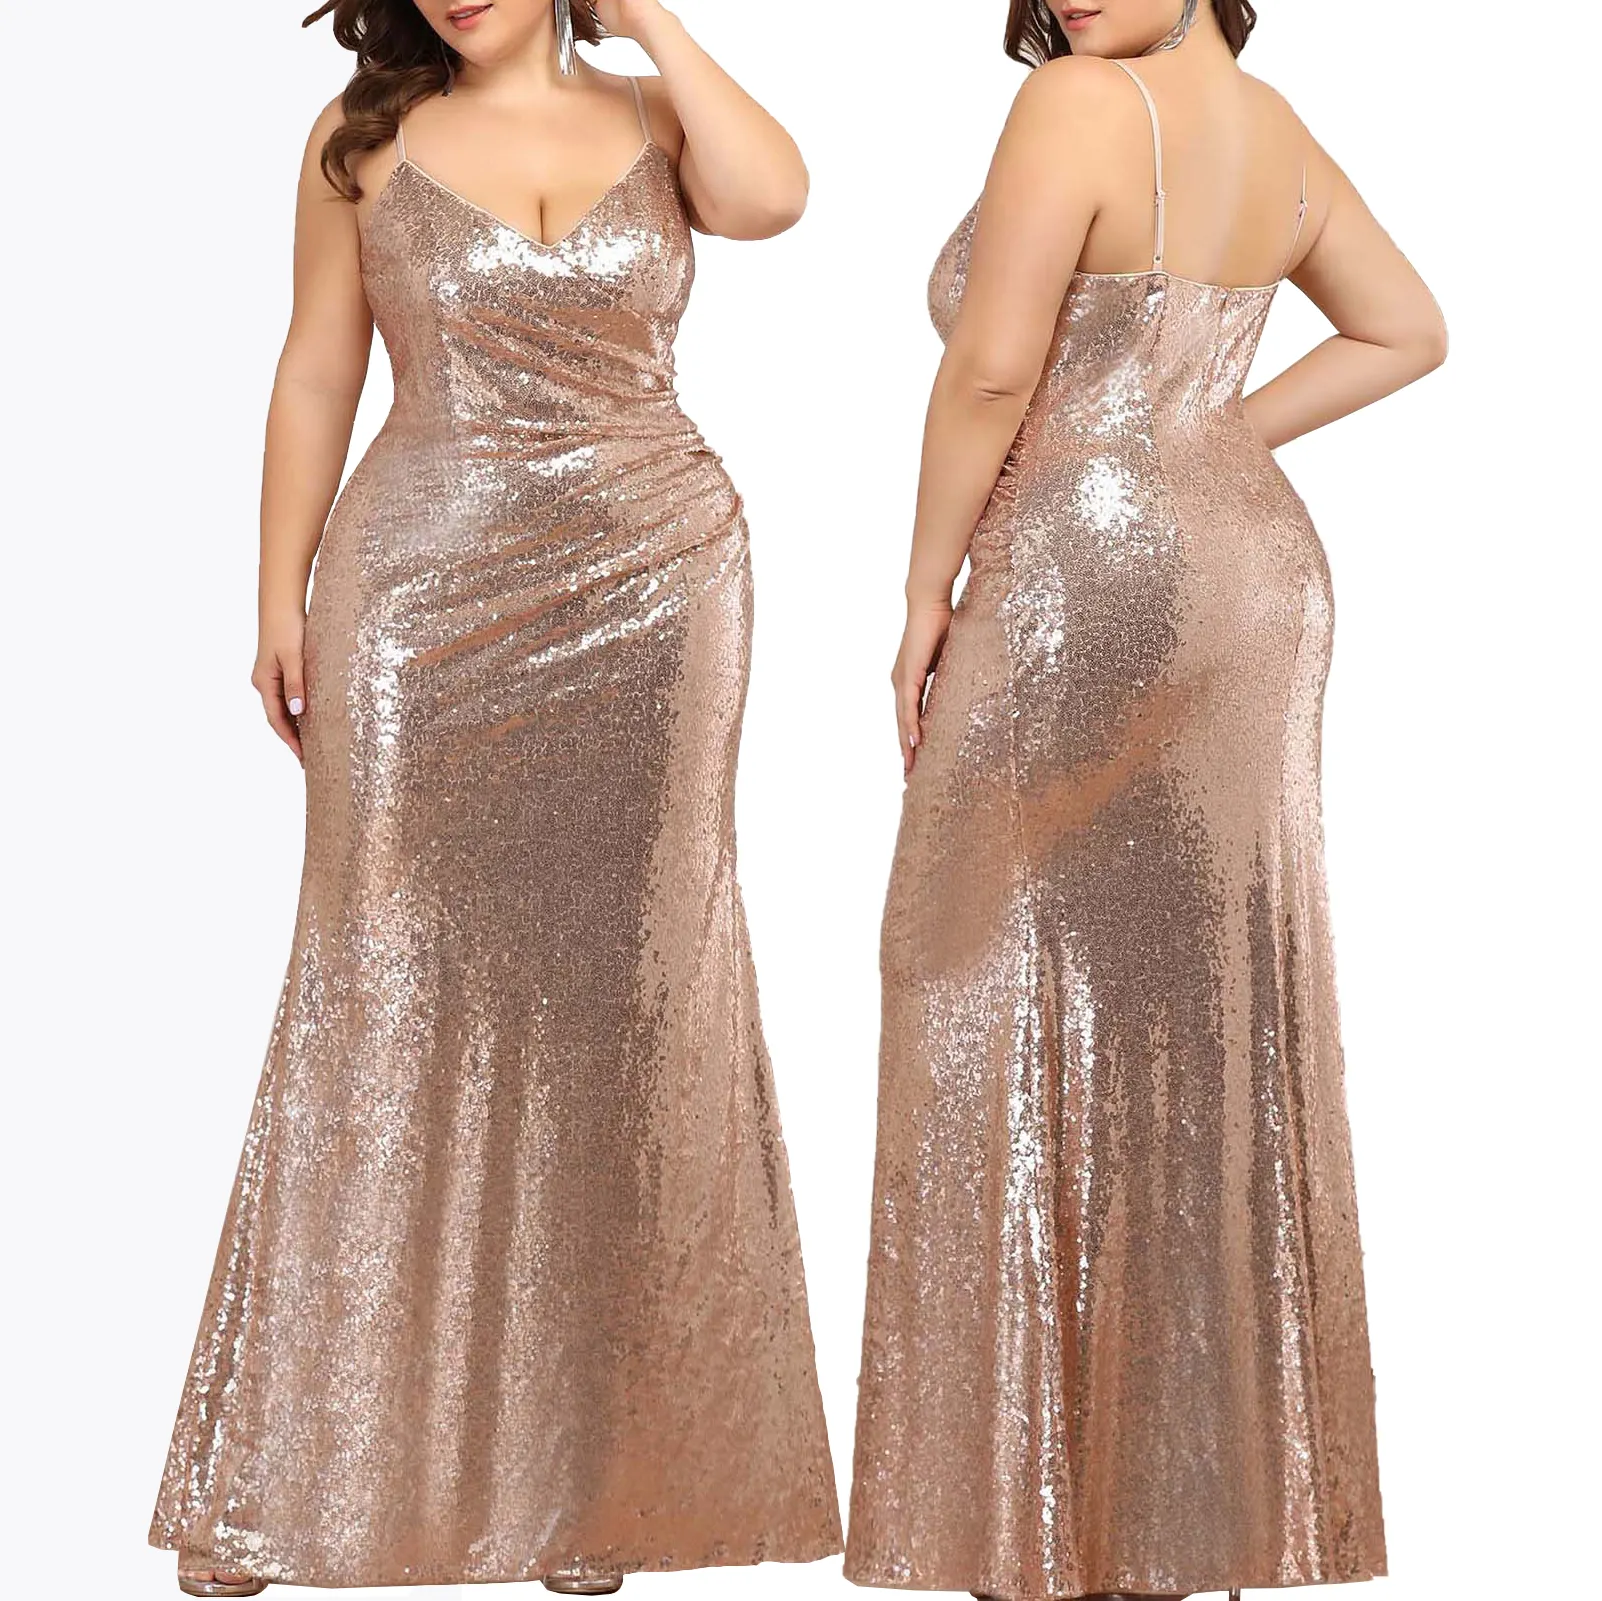 Plus Size Sexy Gold Sequin Cocktail Party Prom Ball Gown Women Lady Long Maxi Dinner Formal Elegant Evening Dress For Fat Woman